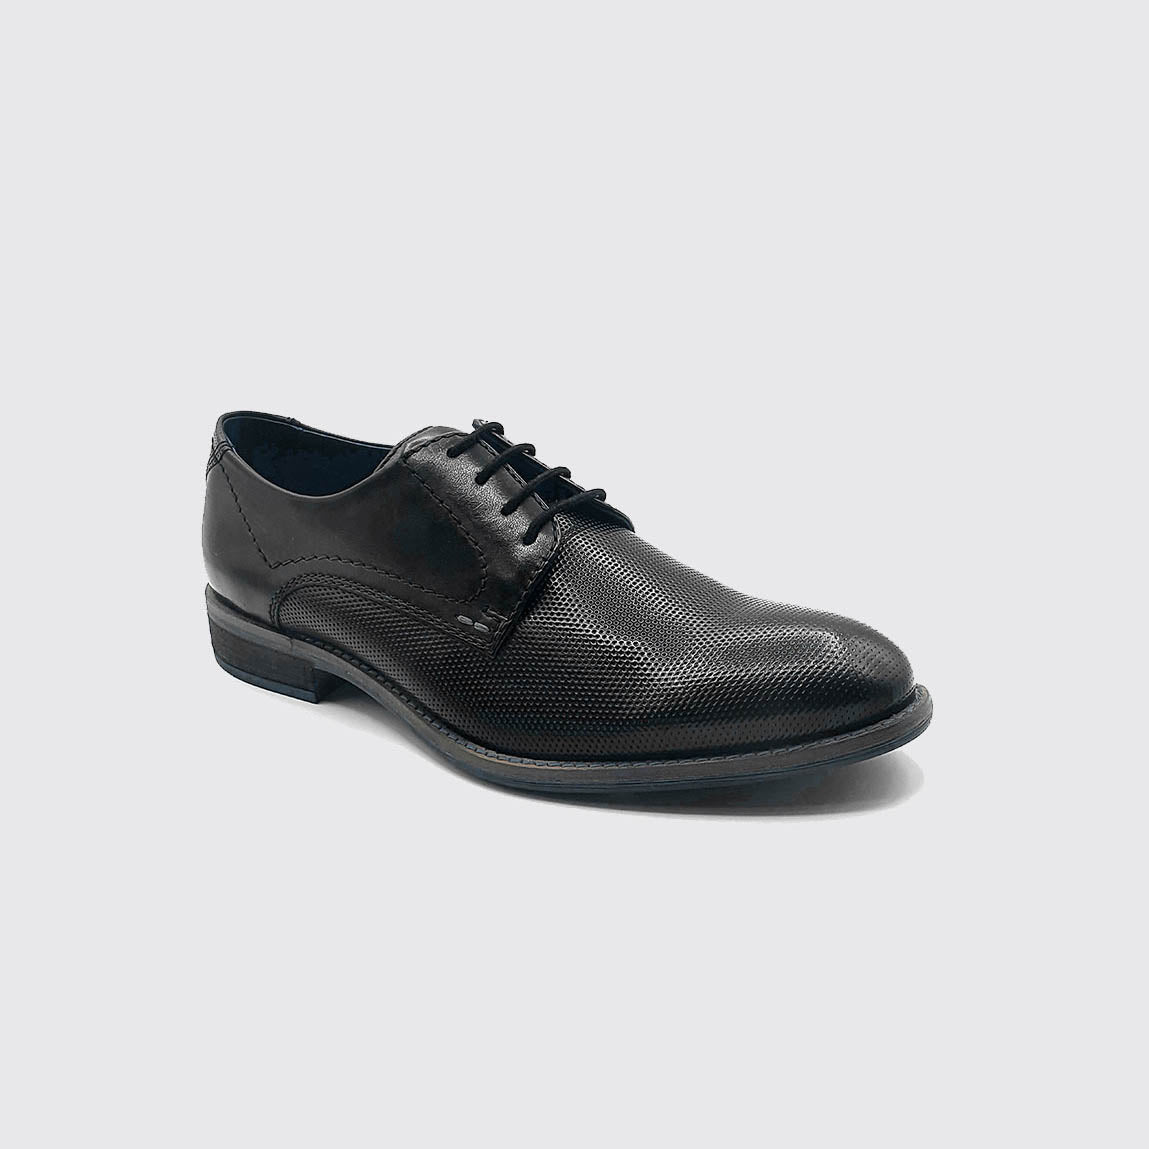 Frontal view of a pair of Dubarry Duke Black shoes.